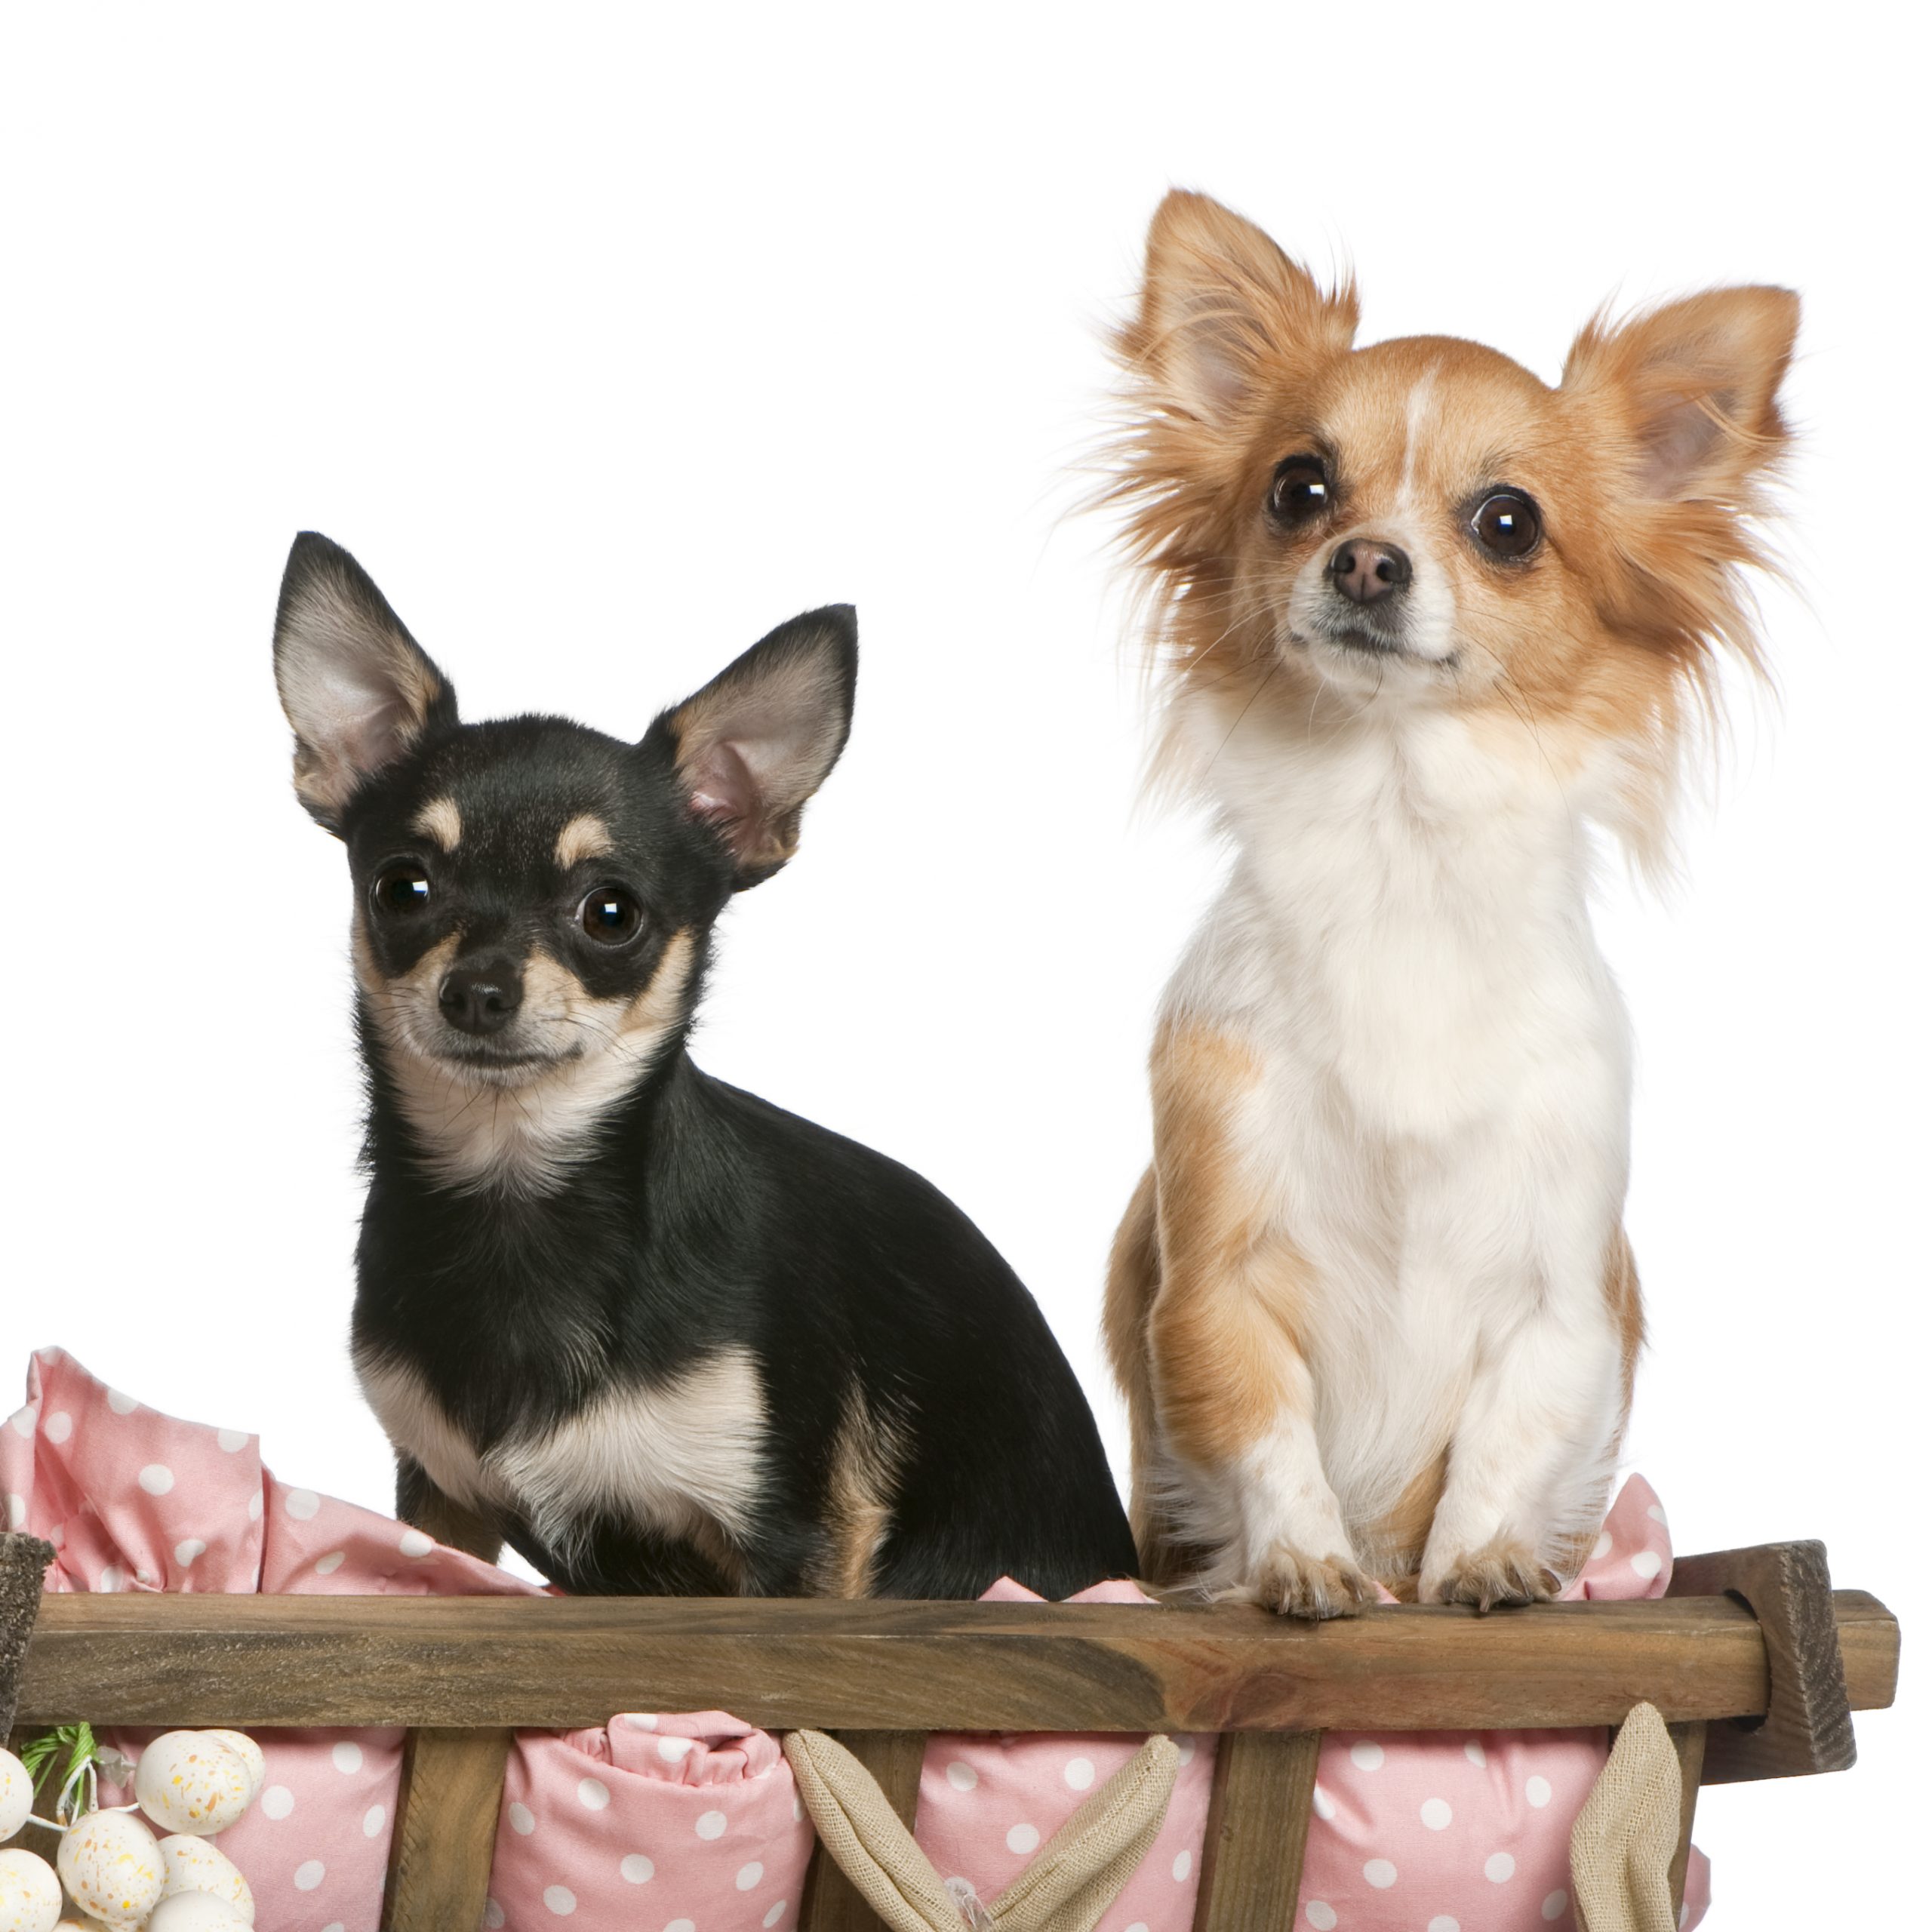 Chihuahuas, 14 months old, sitting in dog bed wagon in front of white background